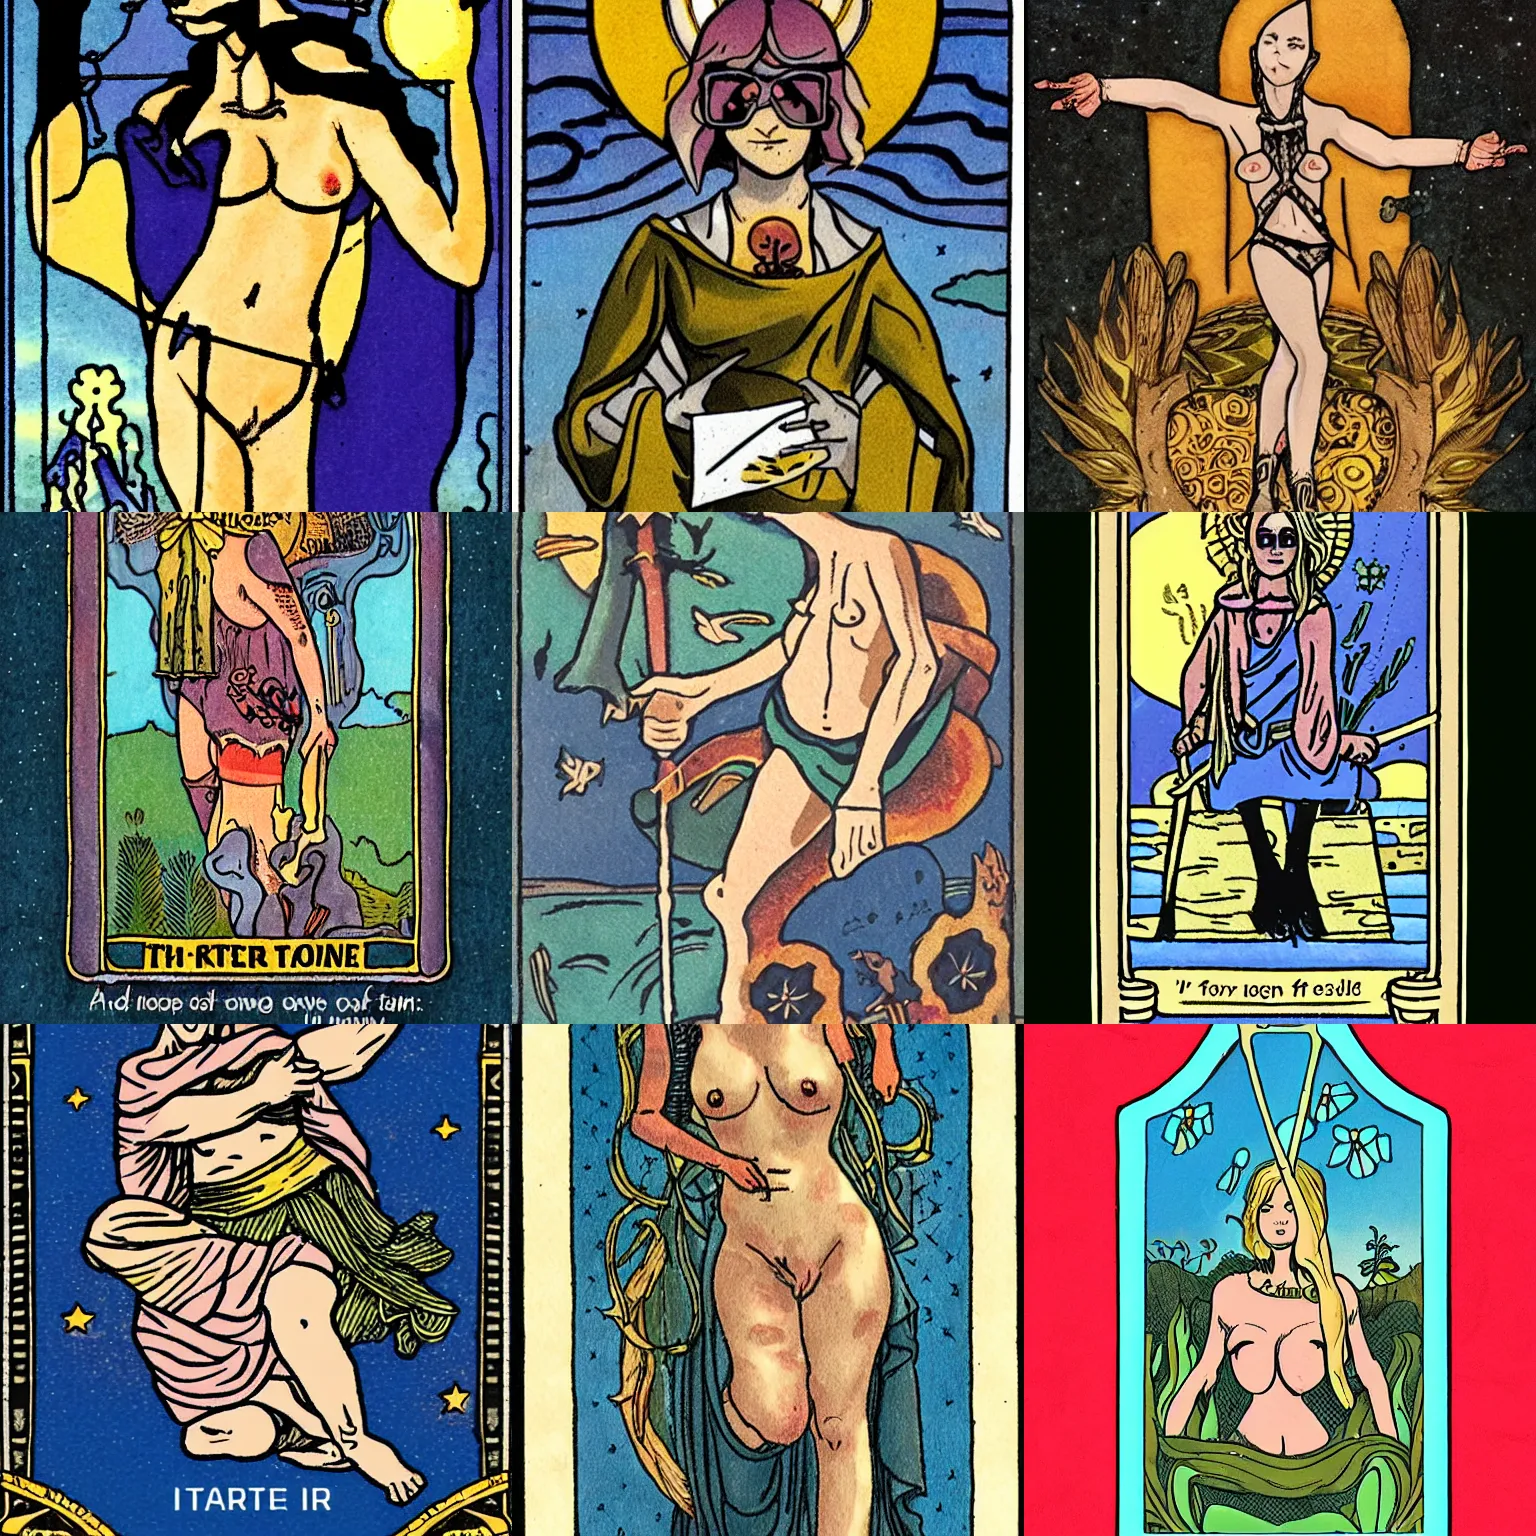 Prompt: alternative tarot card leaving much for the imagination to introspect